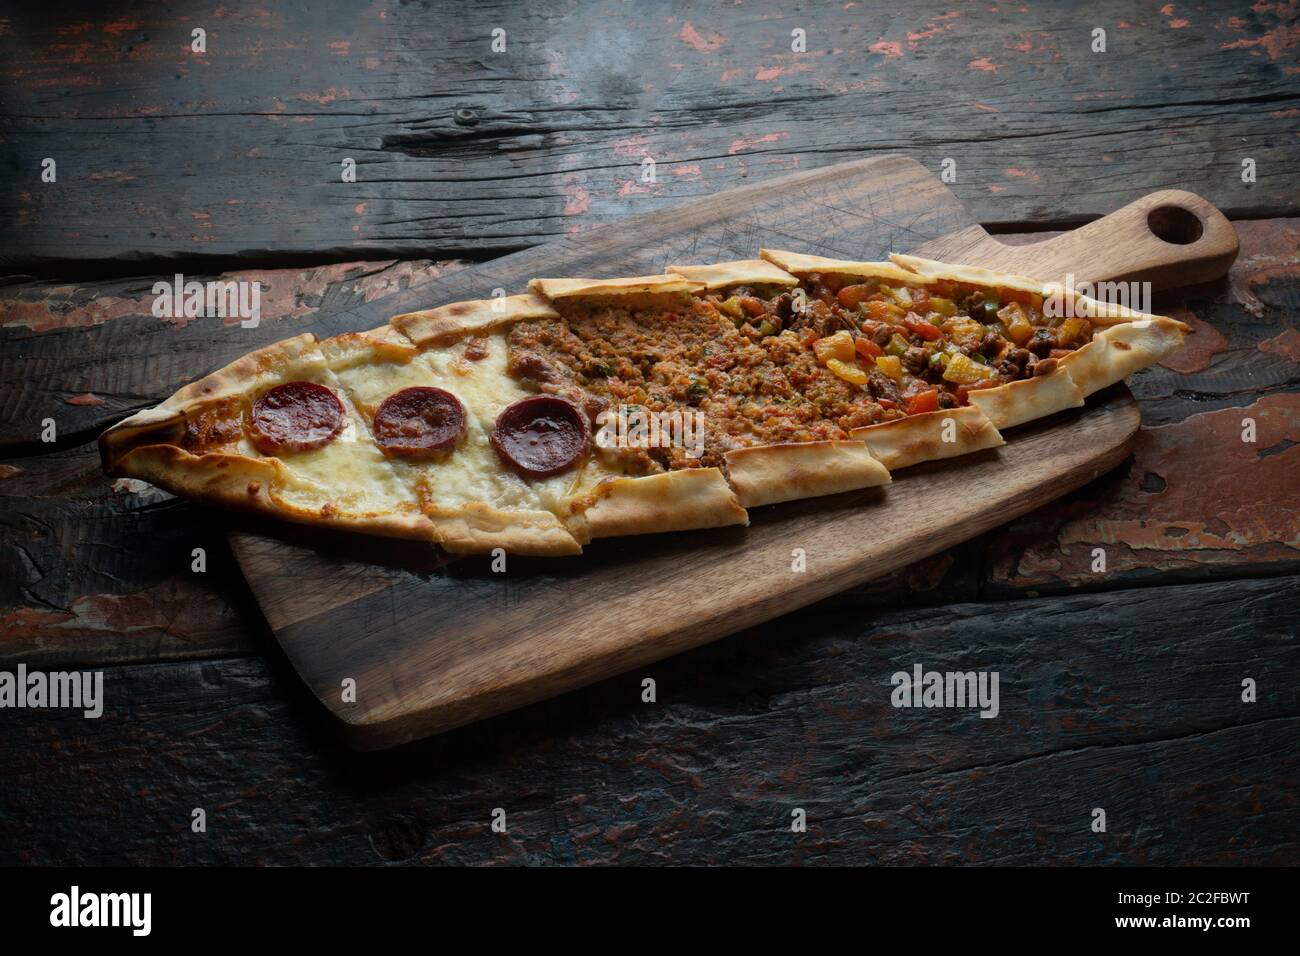 Turkish pide with sausage, beef and vegetables isolated on rustic wooden table Stock Photo